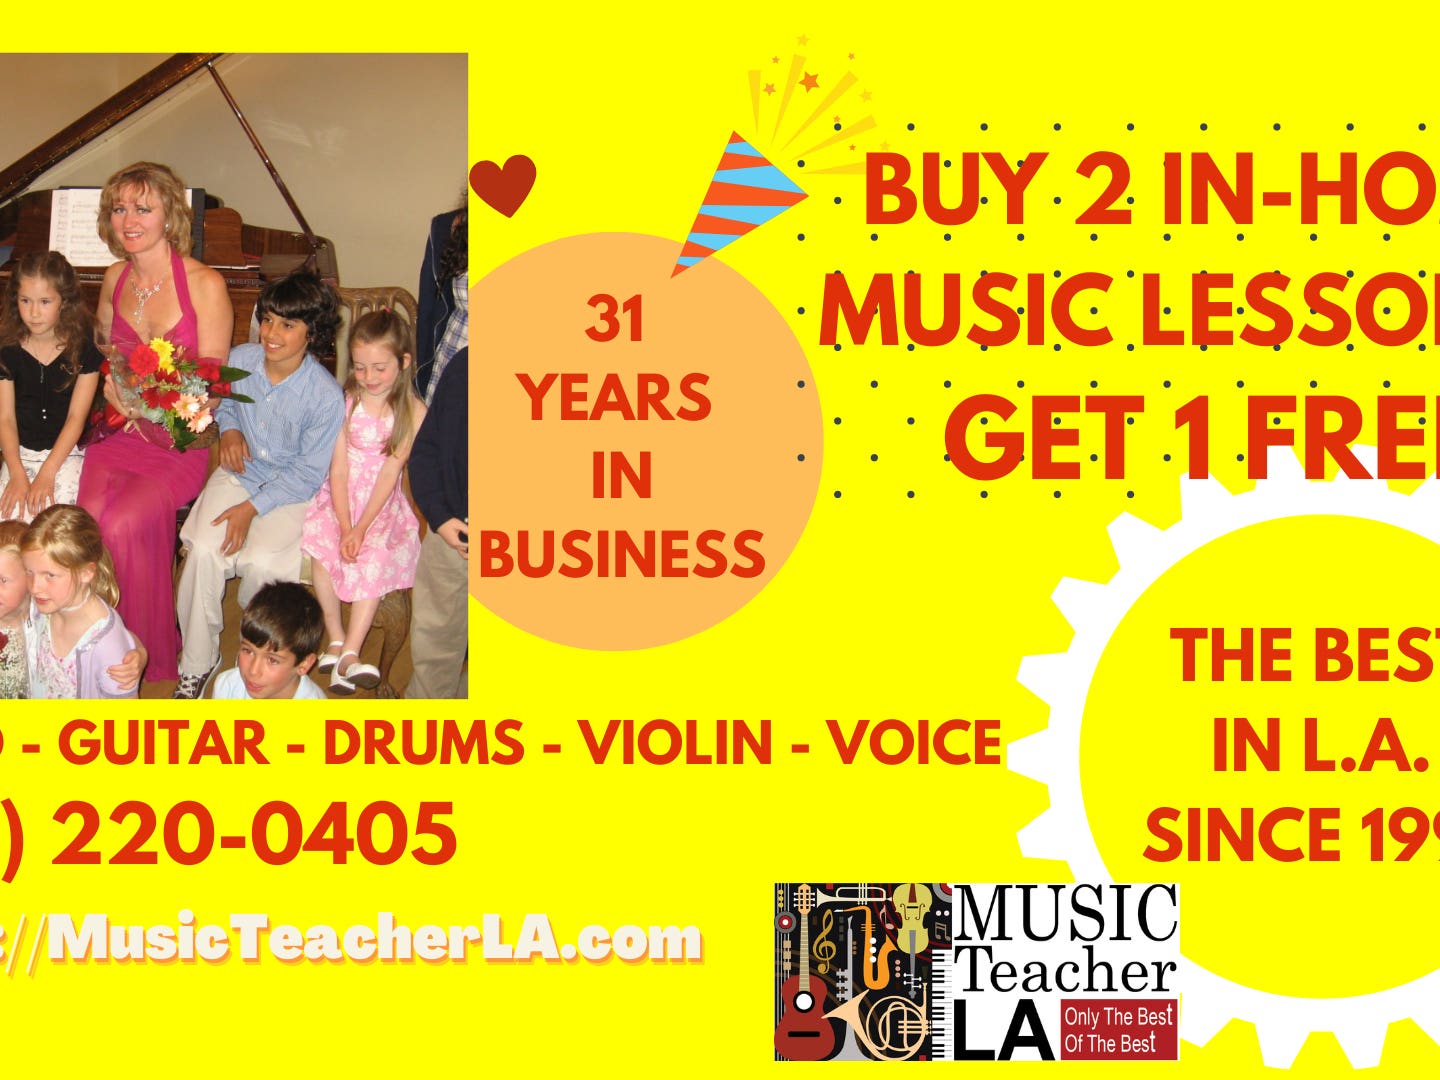 Buy 2, Get 1 FREE Music Lesson with Music Teacher LA | Los Angeles, CA